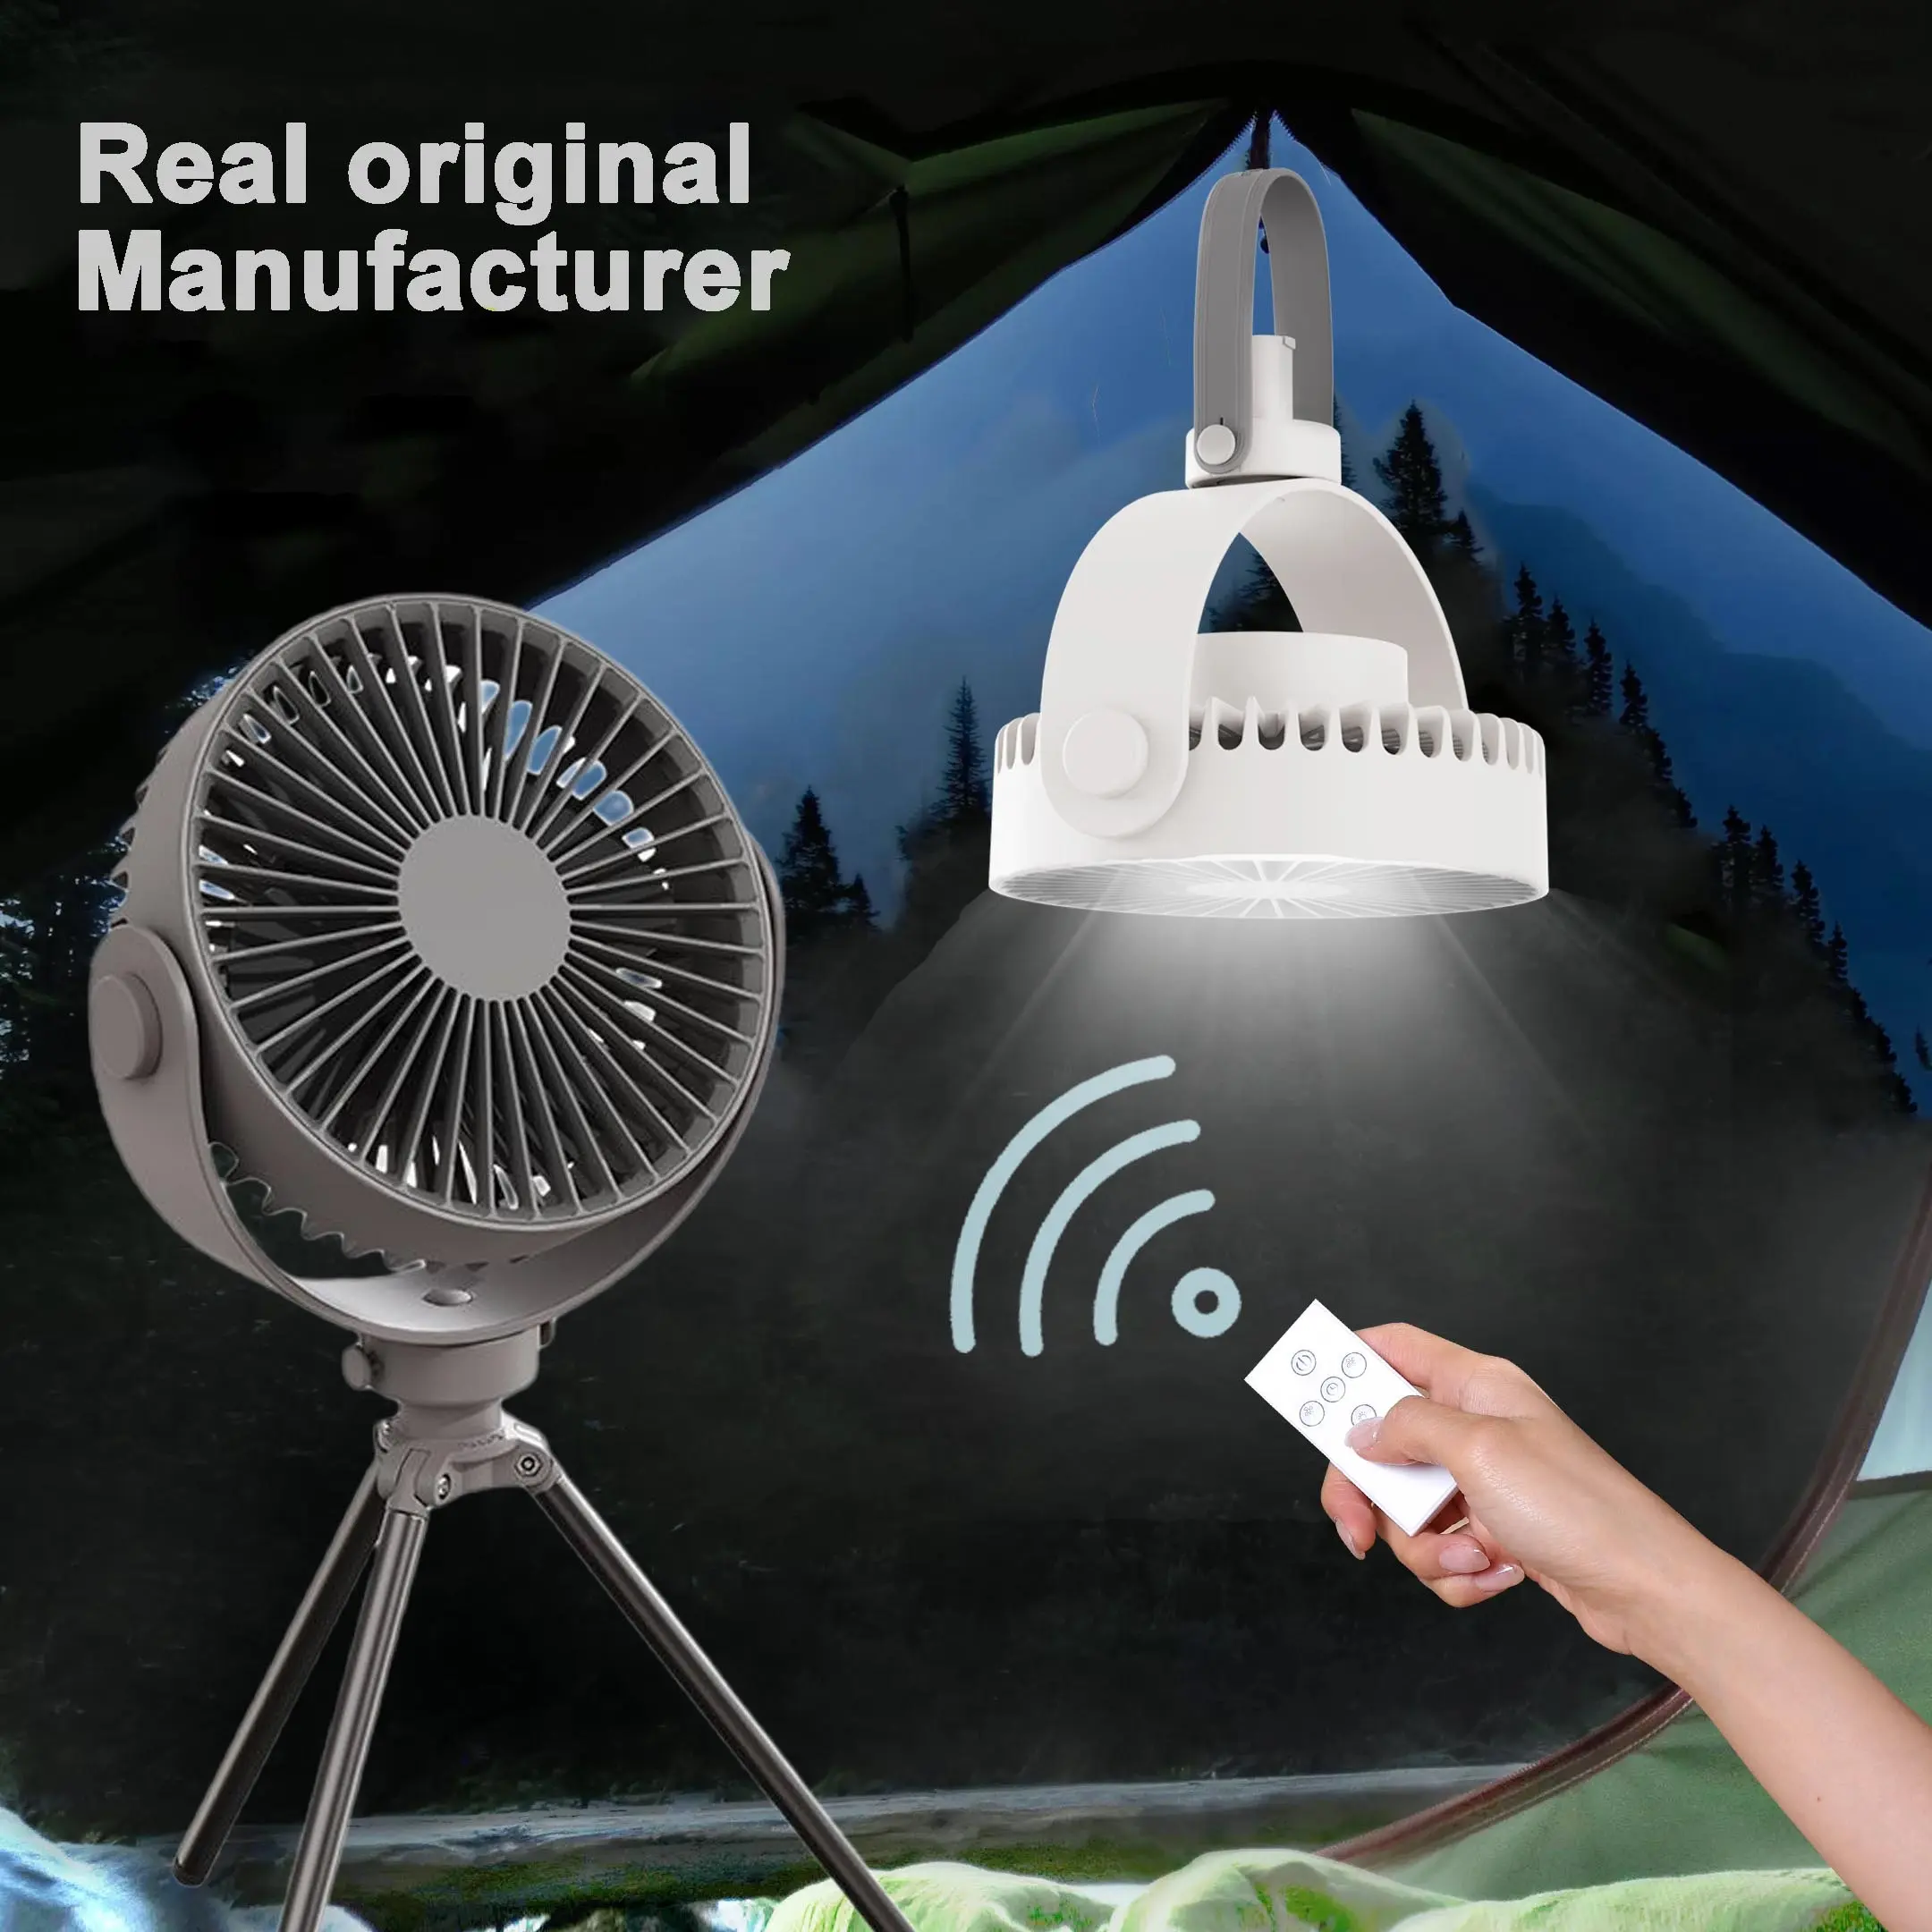 New 2022 desktop fan,portable rechargeable usb tripod fan with remote control,mini led ceiling outdoor camping light fans